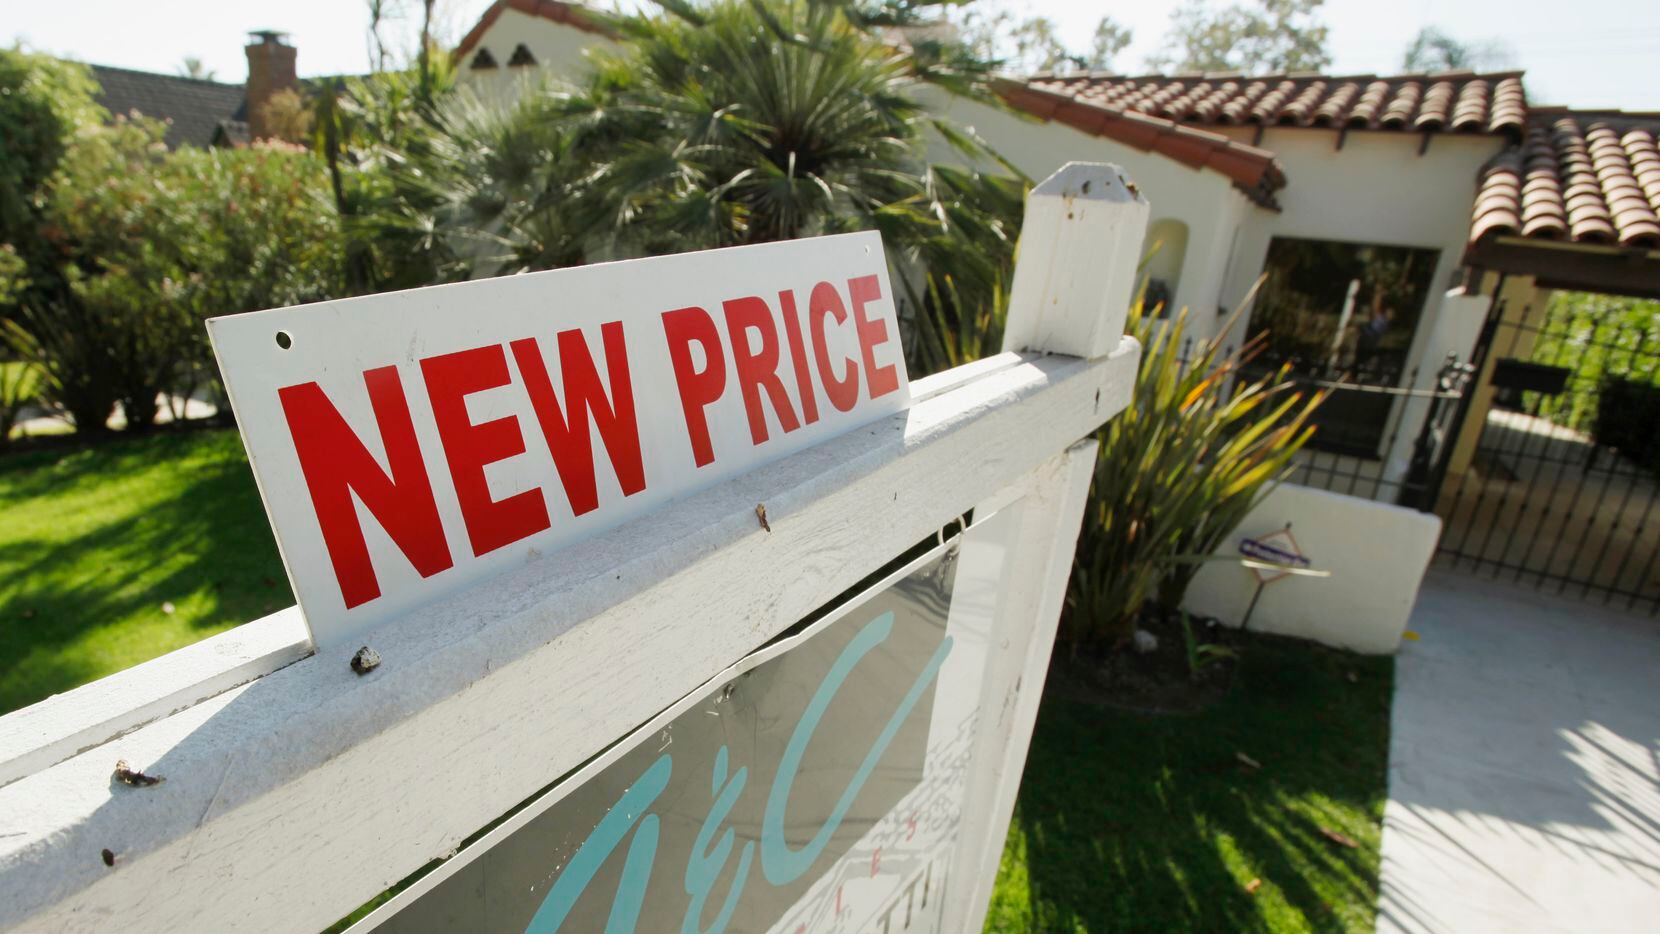 Dallas ranks fourth nationally for home price growth since the Great Recession.